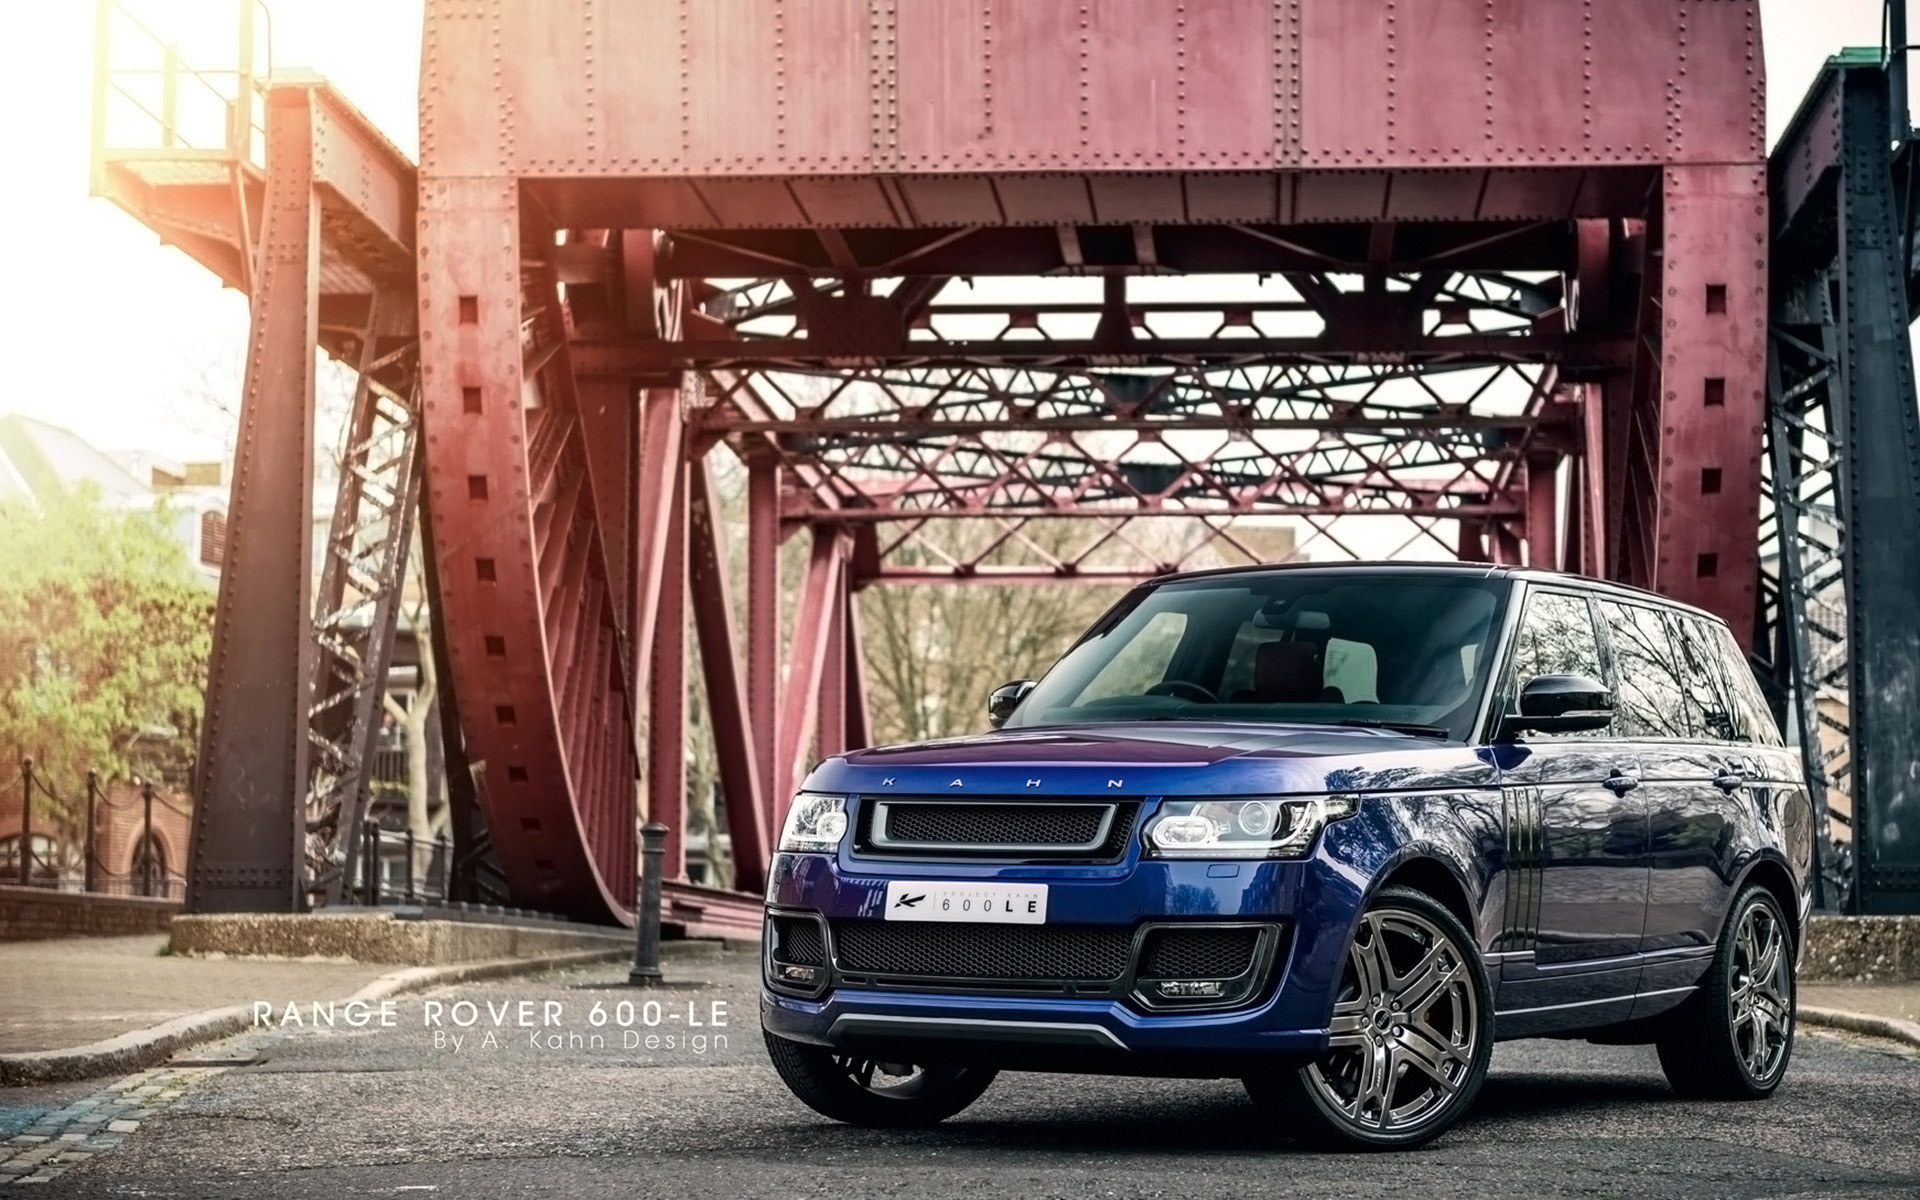 A picture of a blue Range Rover on a bridge.